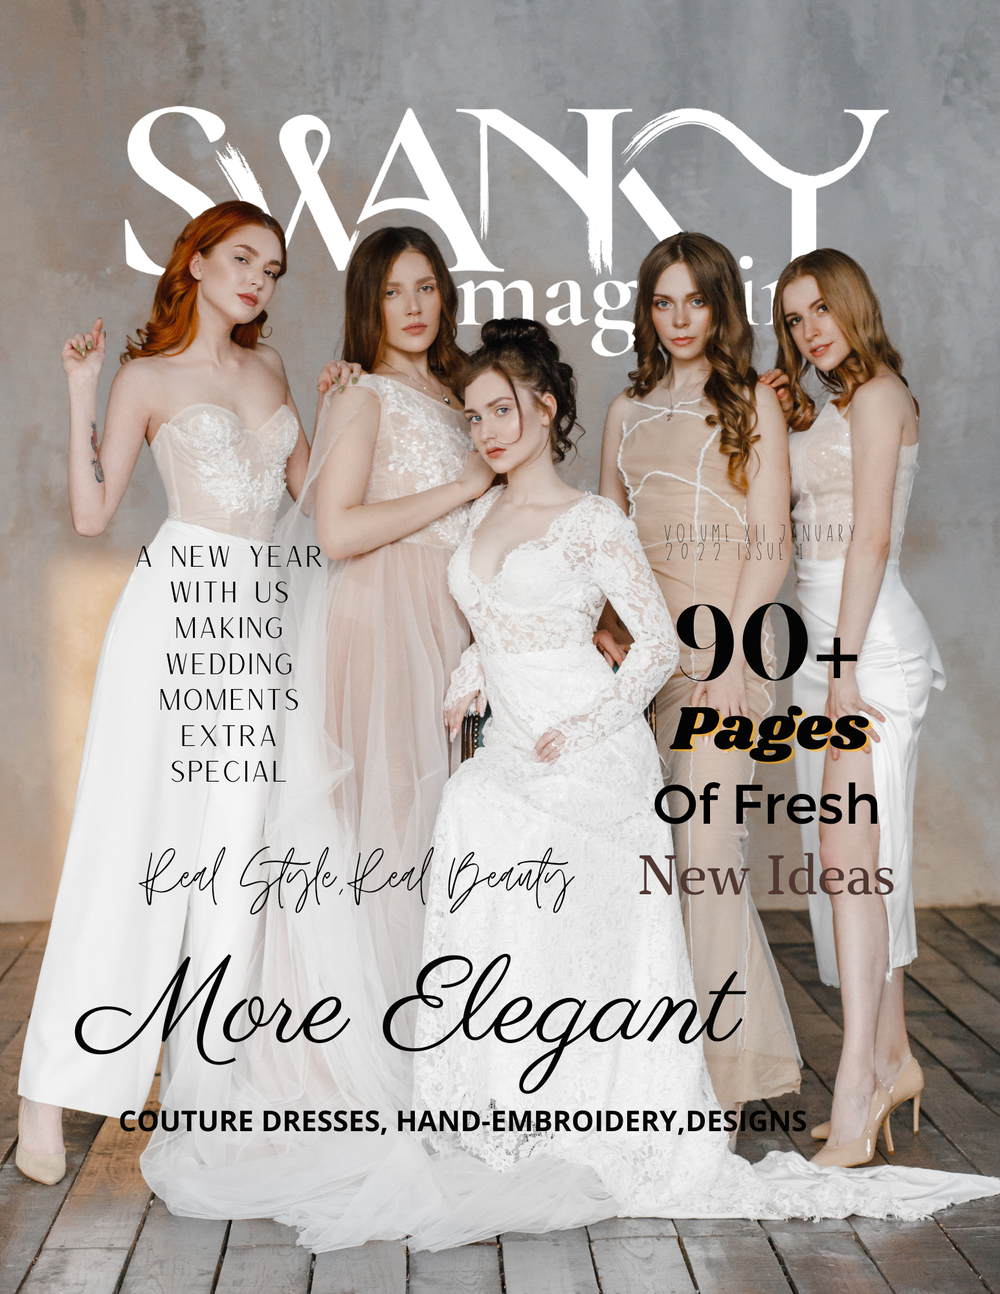 Swanky Wedding Editions January VOL XII Issue 1 - PRINT ISSUE